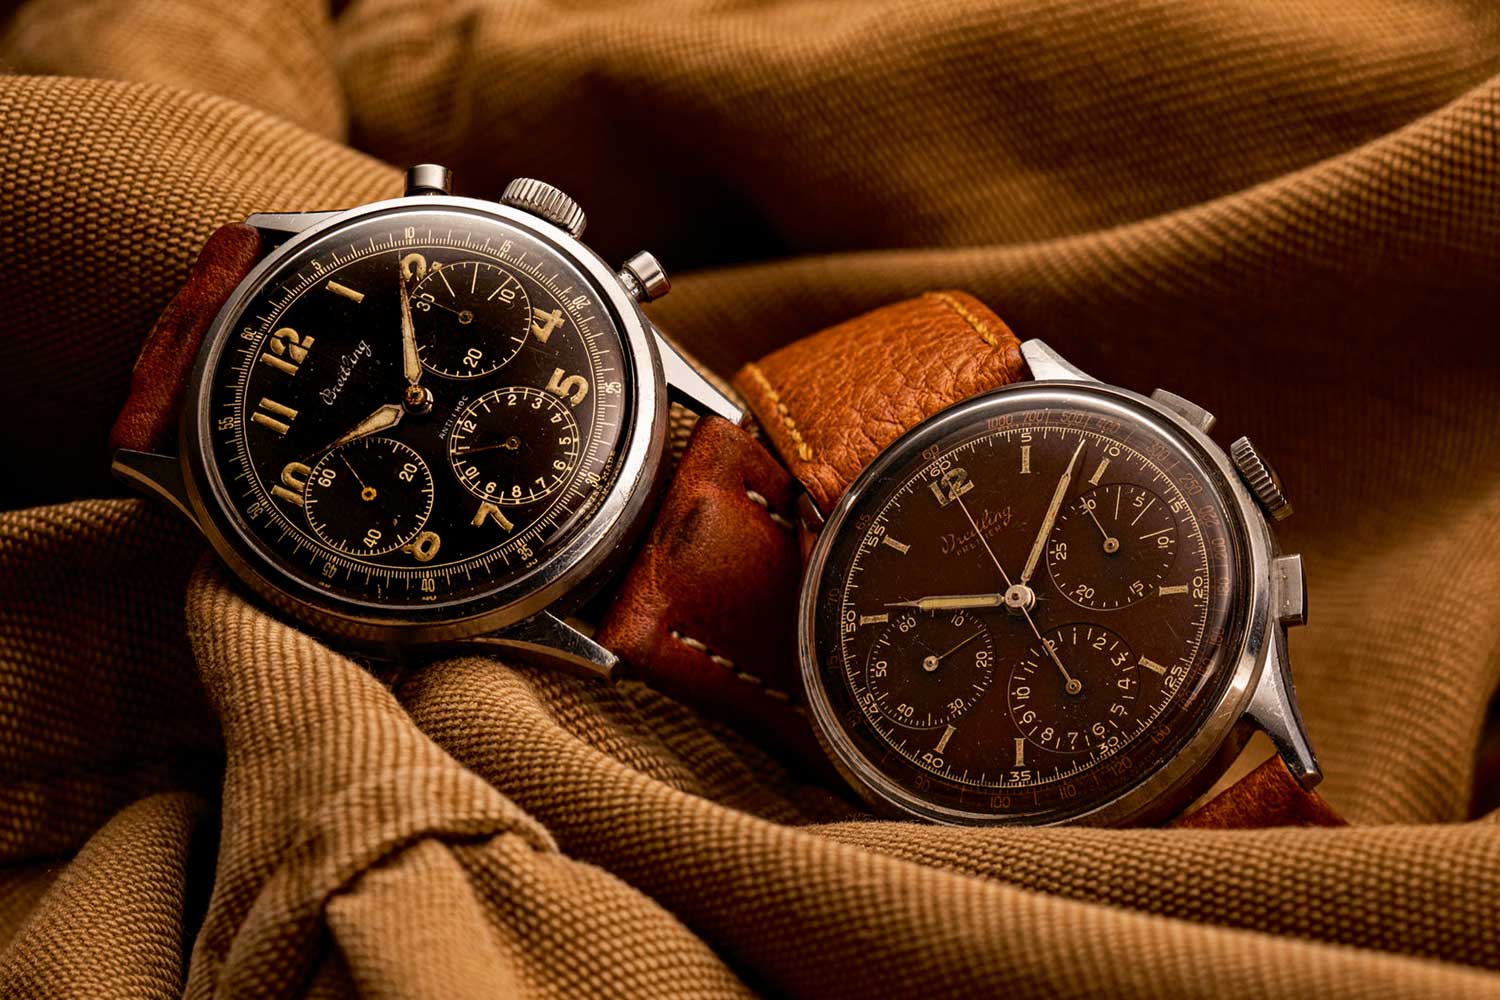 The Breitling Premier ref. 765, ca. 1943 (left) and the Premier ref. 734 inspired the modern collection